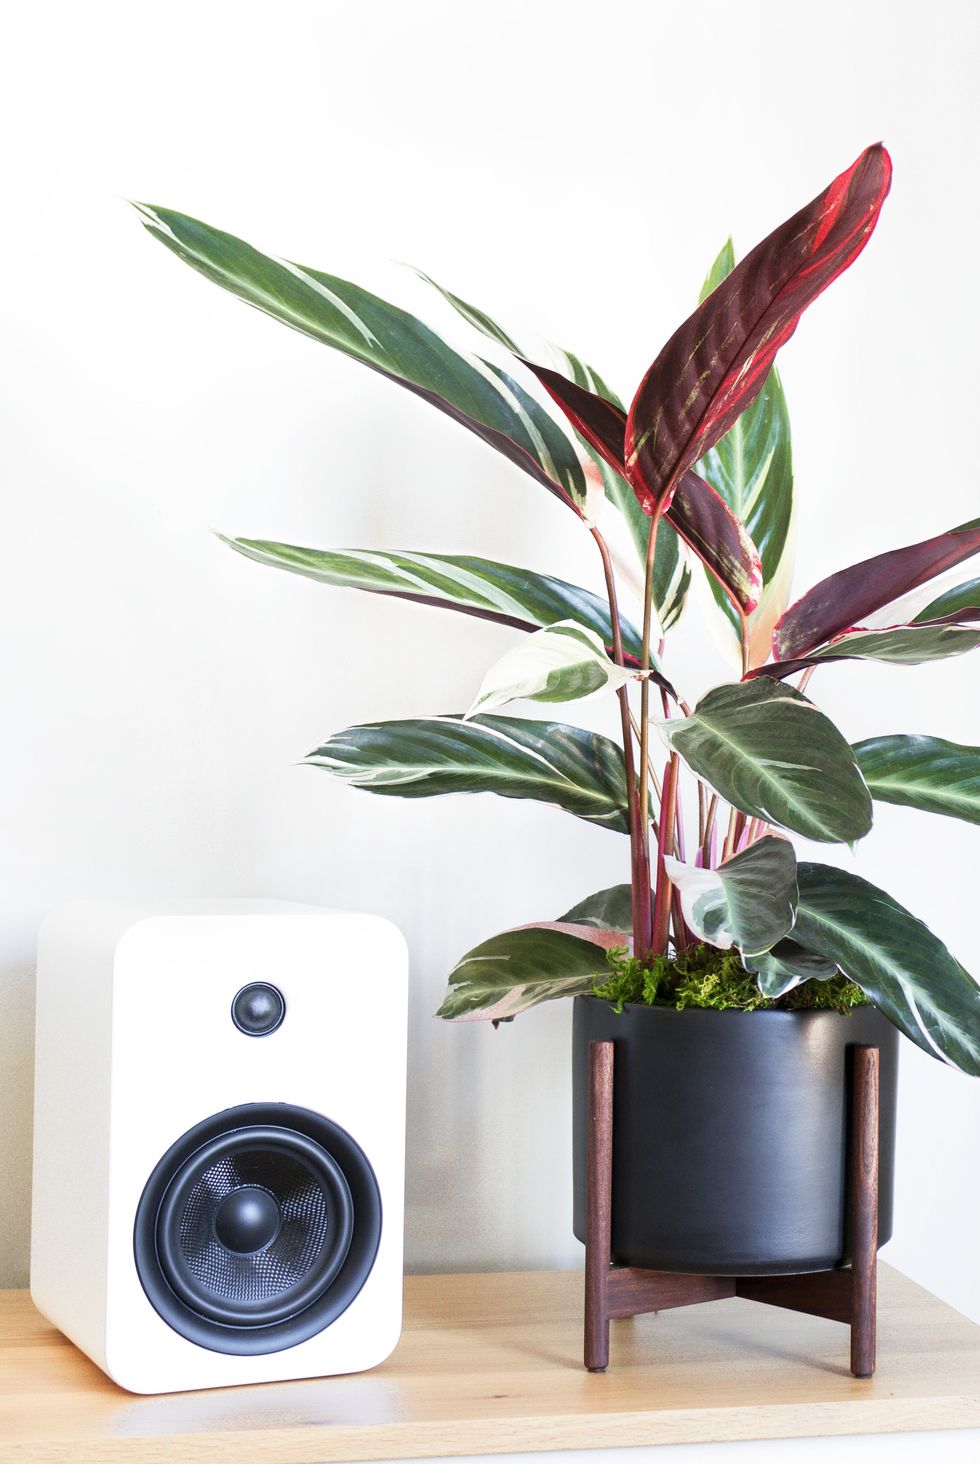 A potted plant next to a white speaker